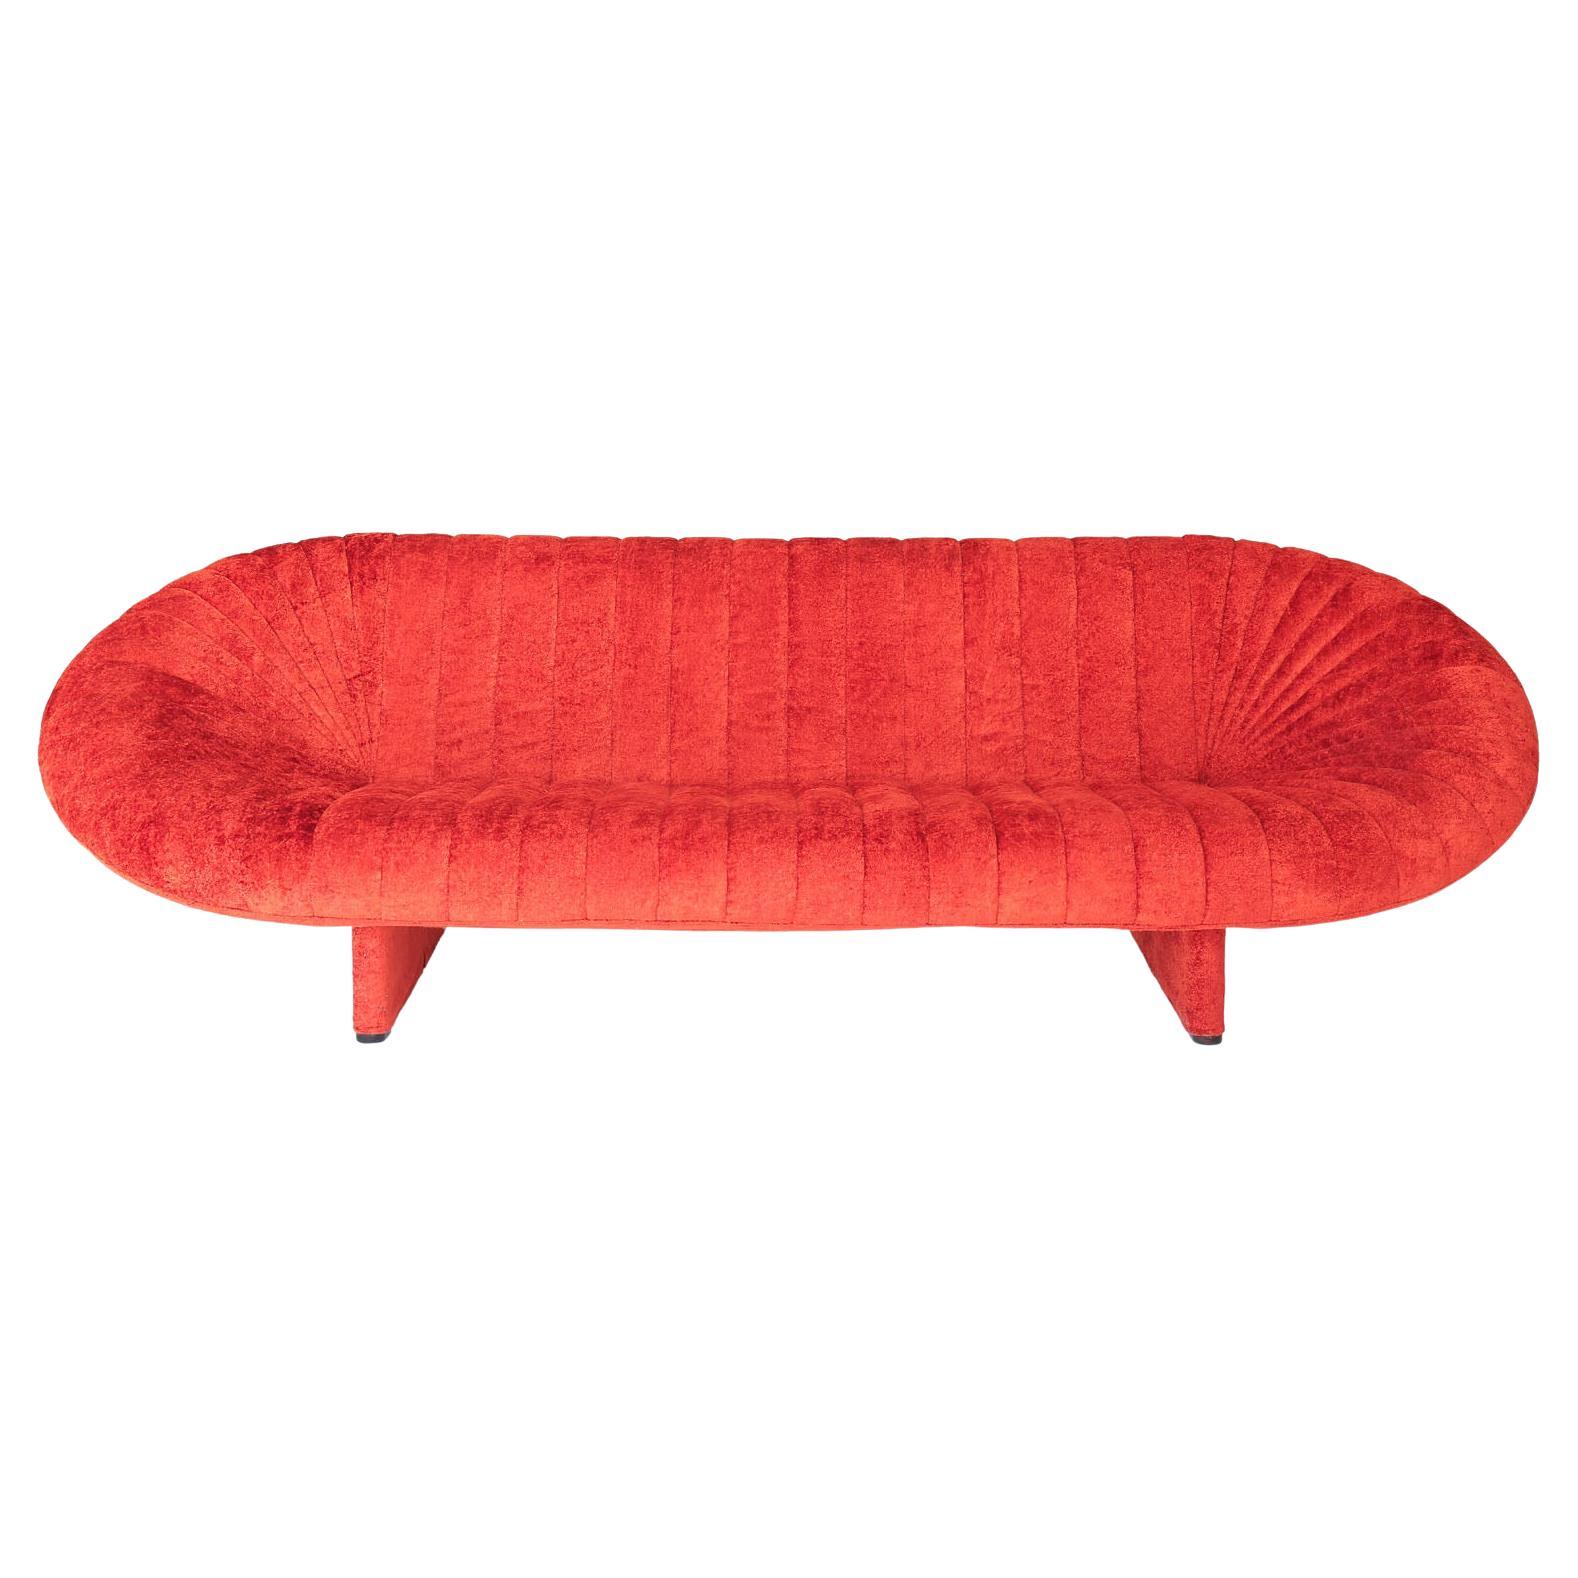 Giovannetti, Modern 2000s Fabric Sofa by S. Giobbi, Red "Re Sole"